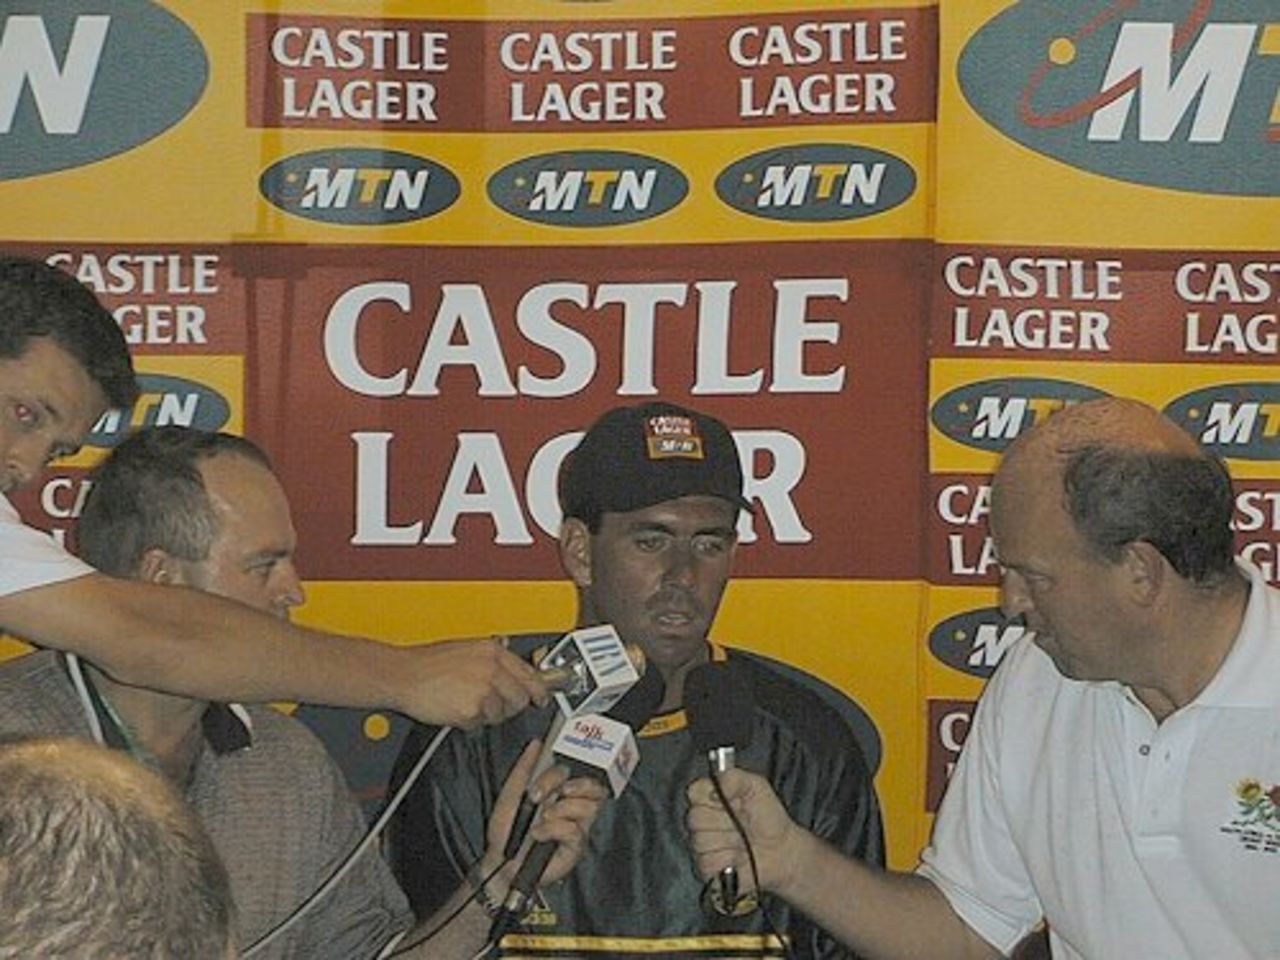 Kingsmead, Durban - Press Conference after day 3 of the 3rd Test between South Africa and England (28 Dec 1999)